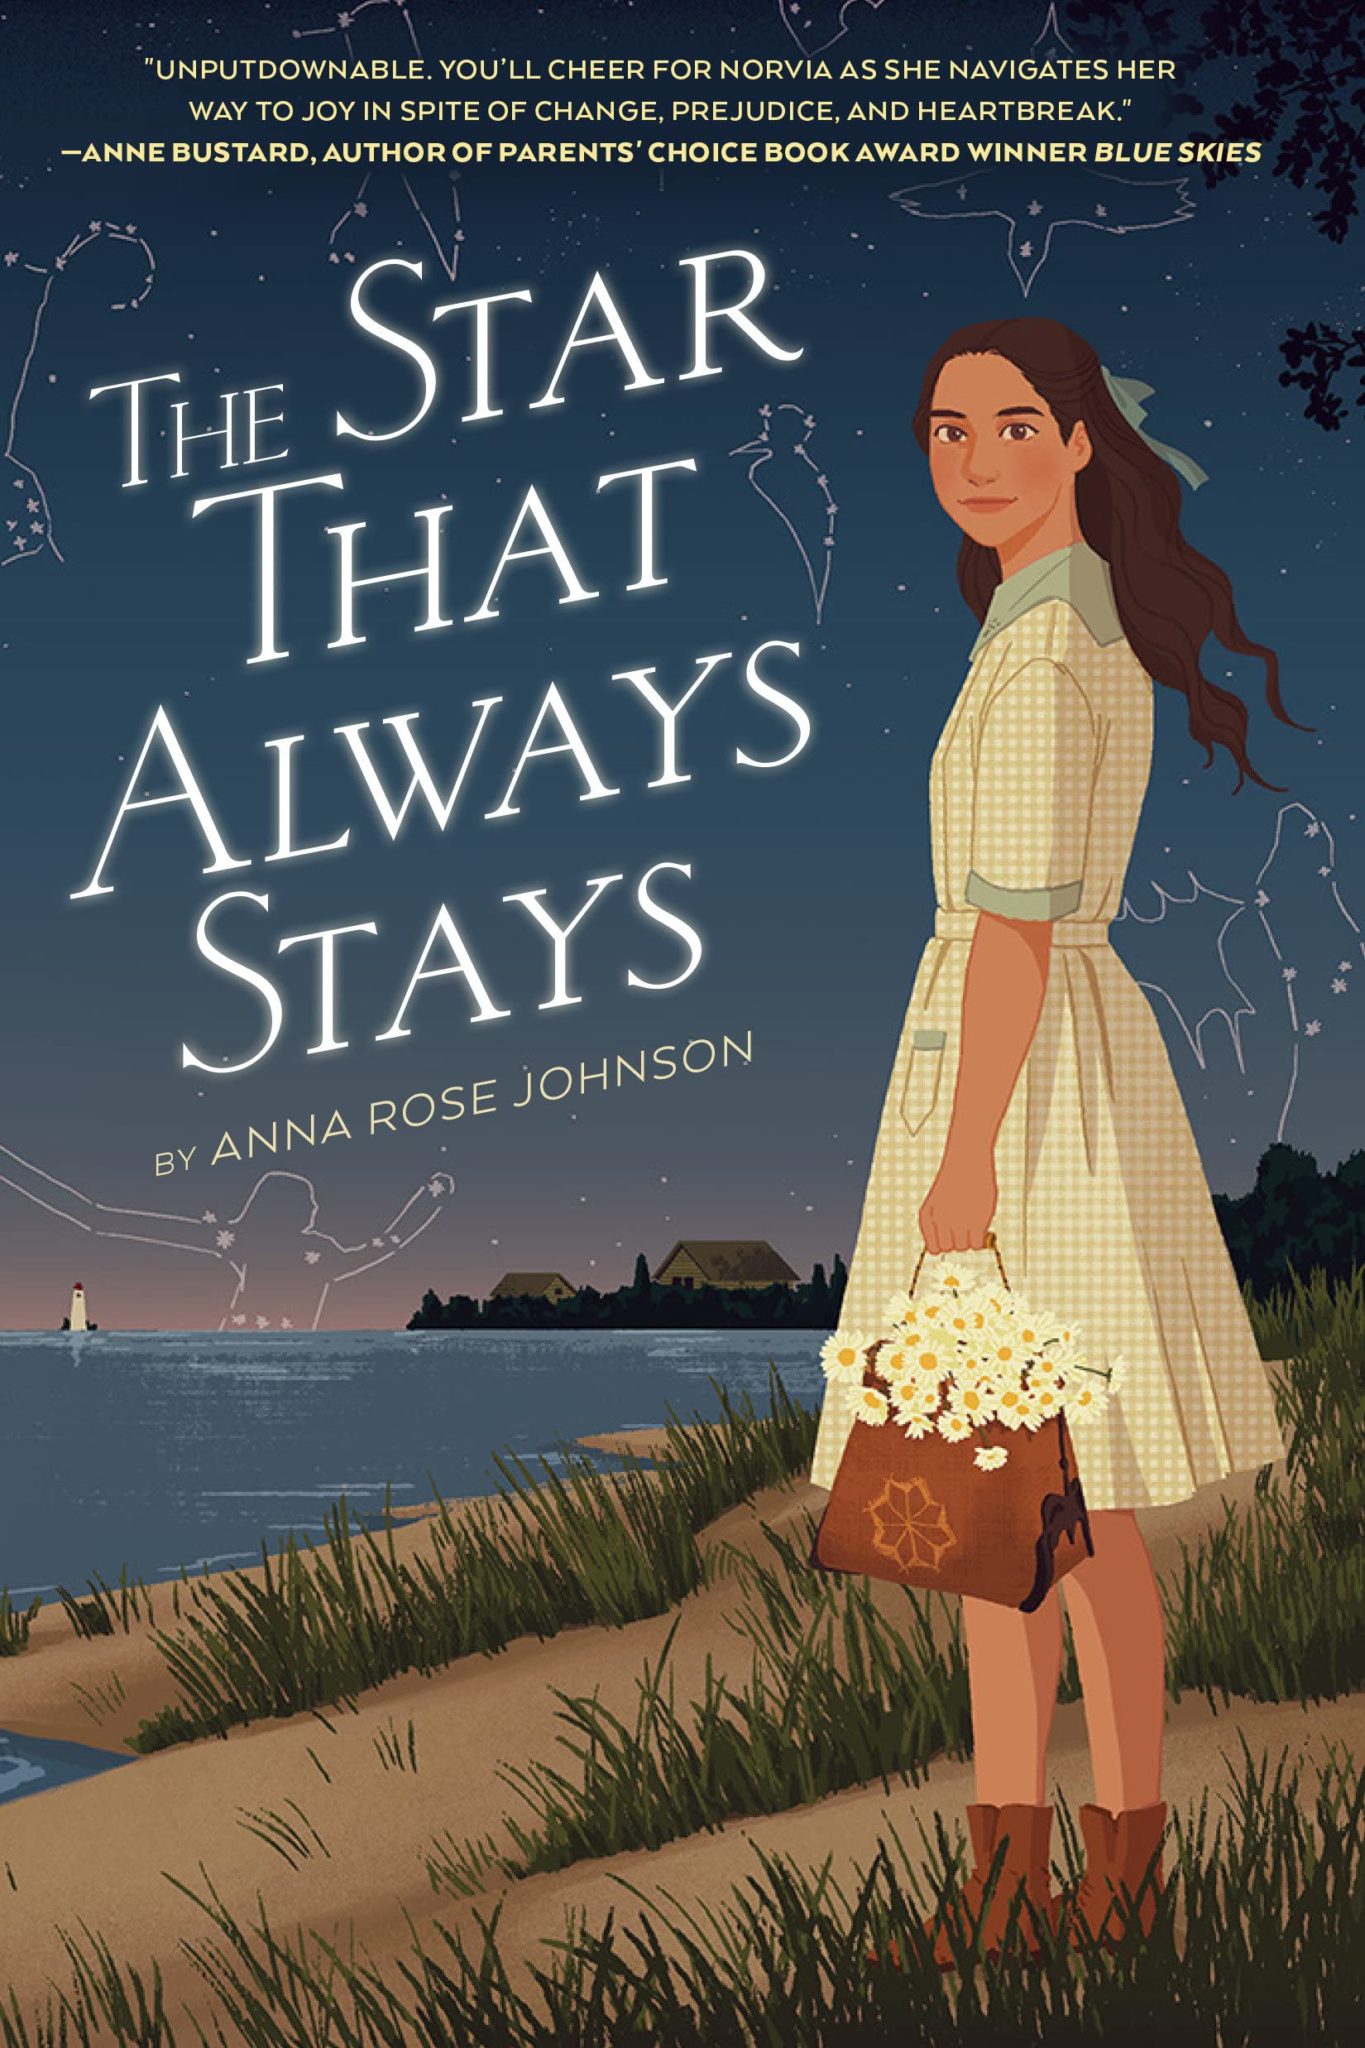 The cover of the book "The Star That Always Stays" features an Ojibwe tween girl in an early 1900s dress, hair bow, and boots. She stands on the sandy shore of a lake and holds a bag full of daisies. It's twilight, and there are constellations of animals and people in the sky. 